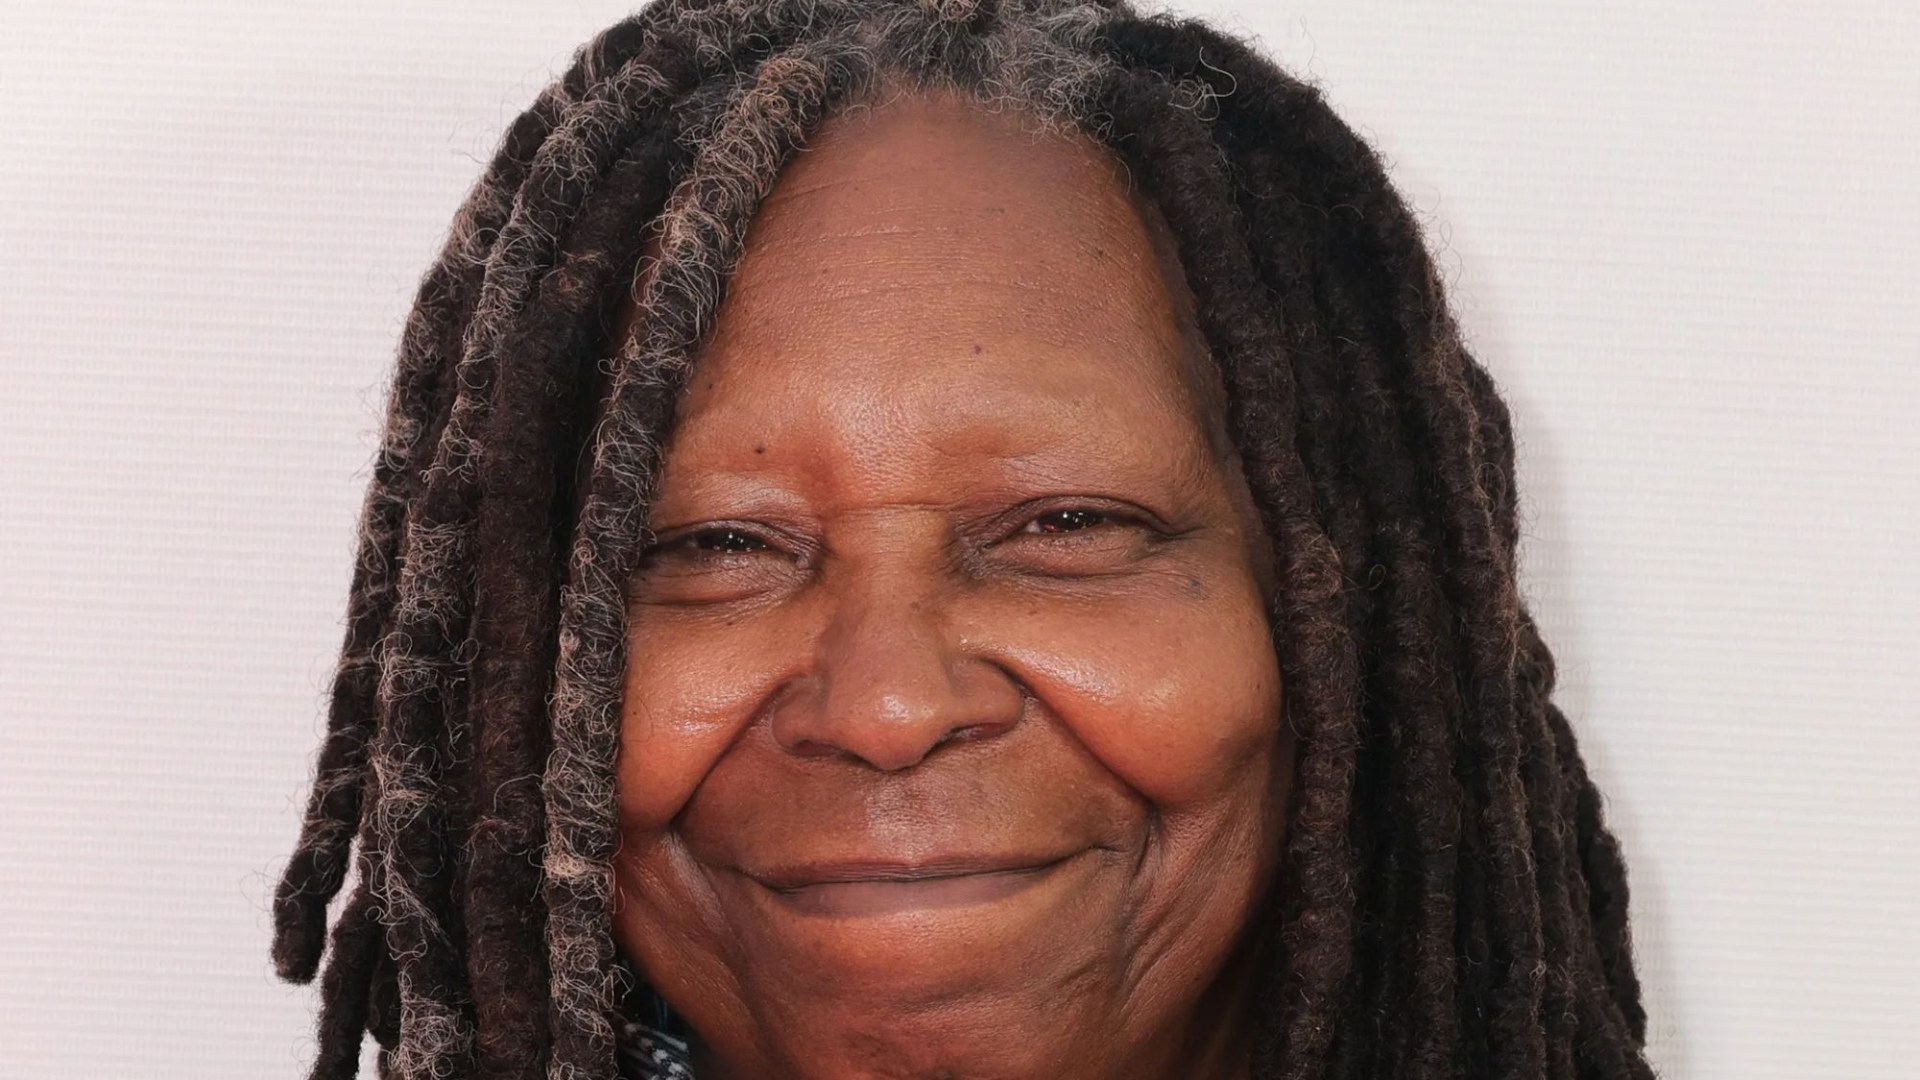 Whoopi Goldberg nabs major new gig away from The View as fans slam star’s ‘inappropriate’ behavior on daytime show